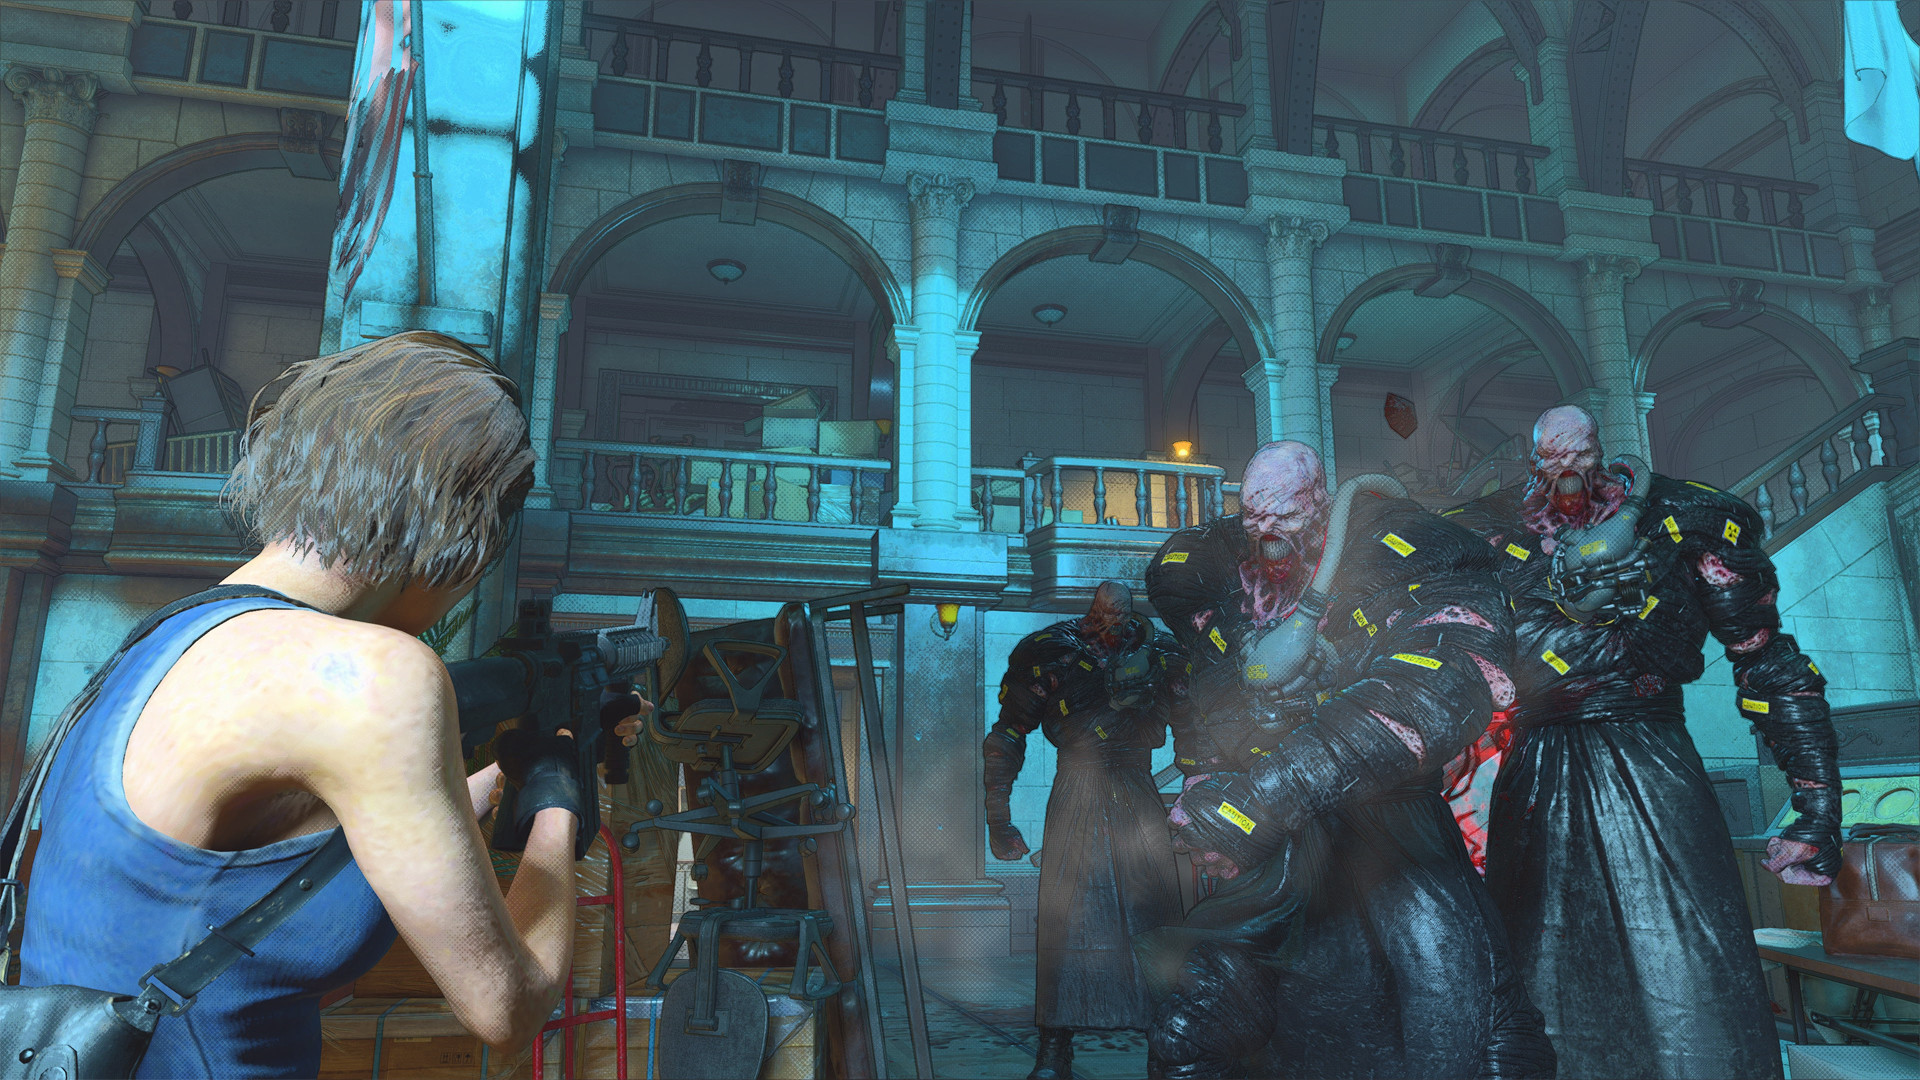 Resident Evil Re:Verse - Videojuego (PS4, Xbox One y PC) - Vandal